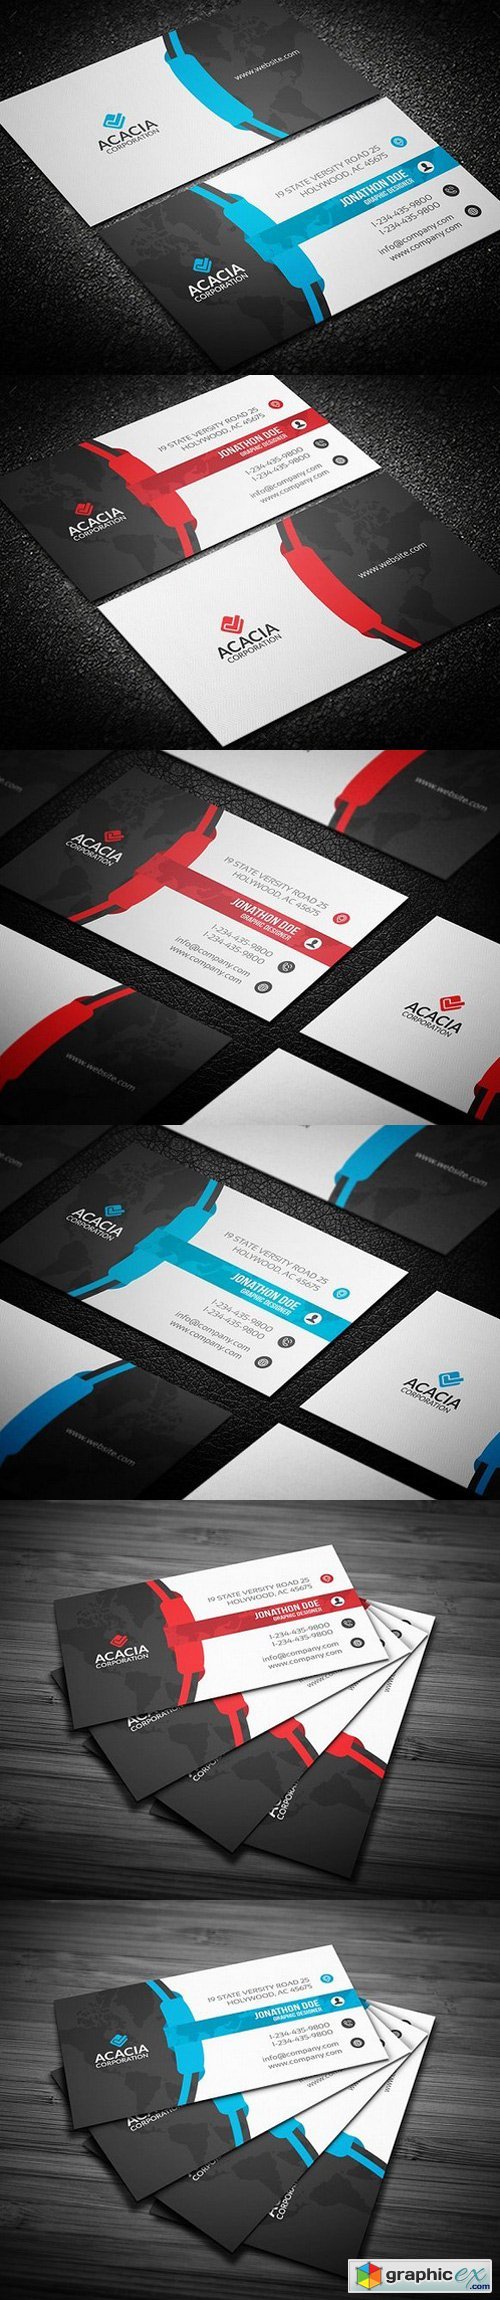 Business Card 795518